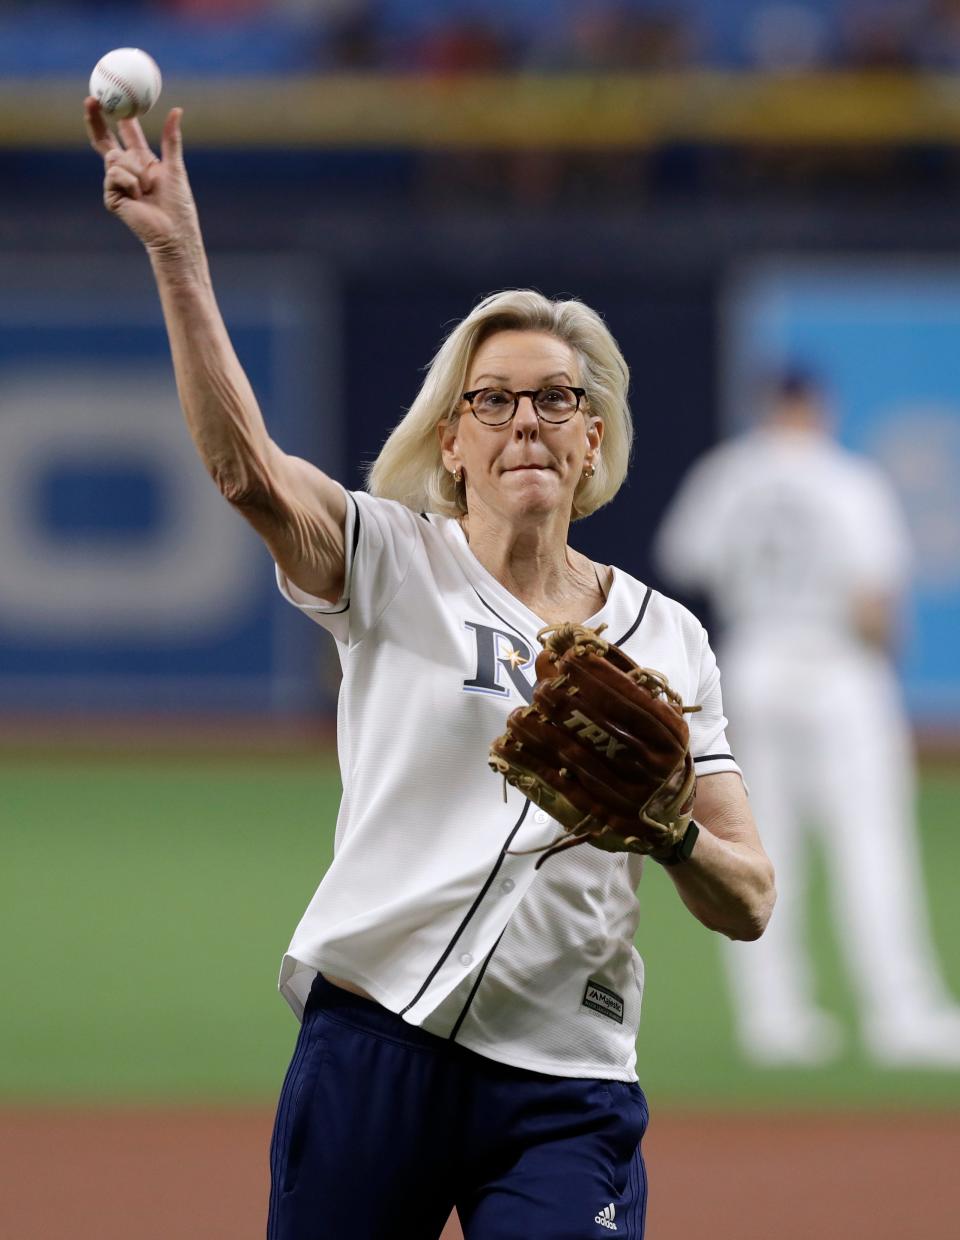 Tampa, Fla., Mayor Jane Castor throws out the ceremonial first pitch before a baseball game between the Tampa Bay Rays and the Los Angeles Angels on Friday, June 14, 2019, in St. Petersburg, Fla. Castor is Tampa's first LGBTQ mayor. The Rays were celebrating Pride Night. (AP Photo/Chris O'Meara)